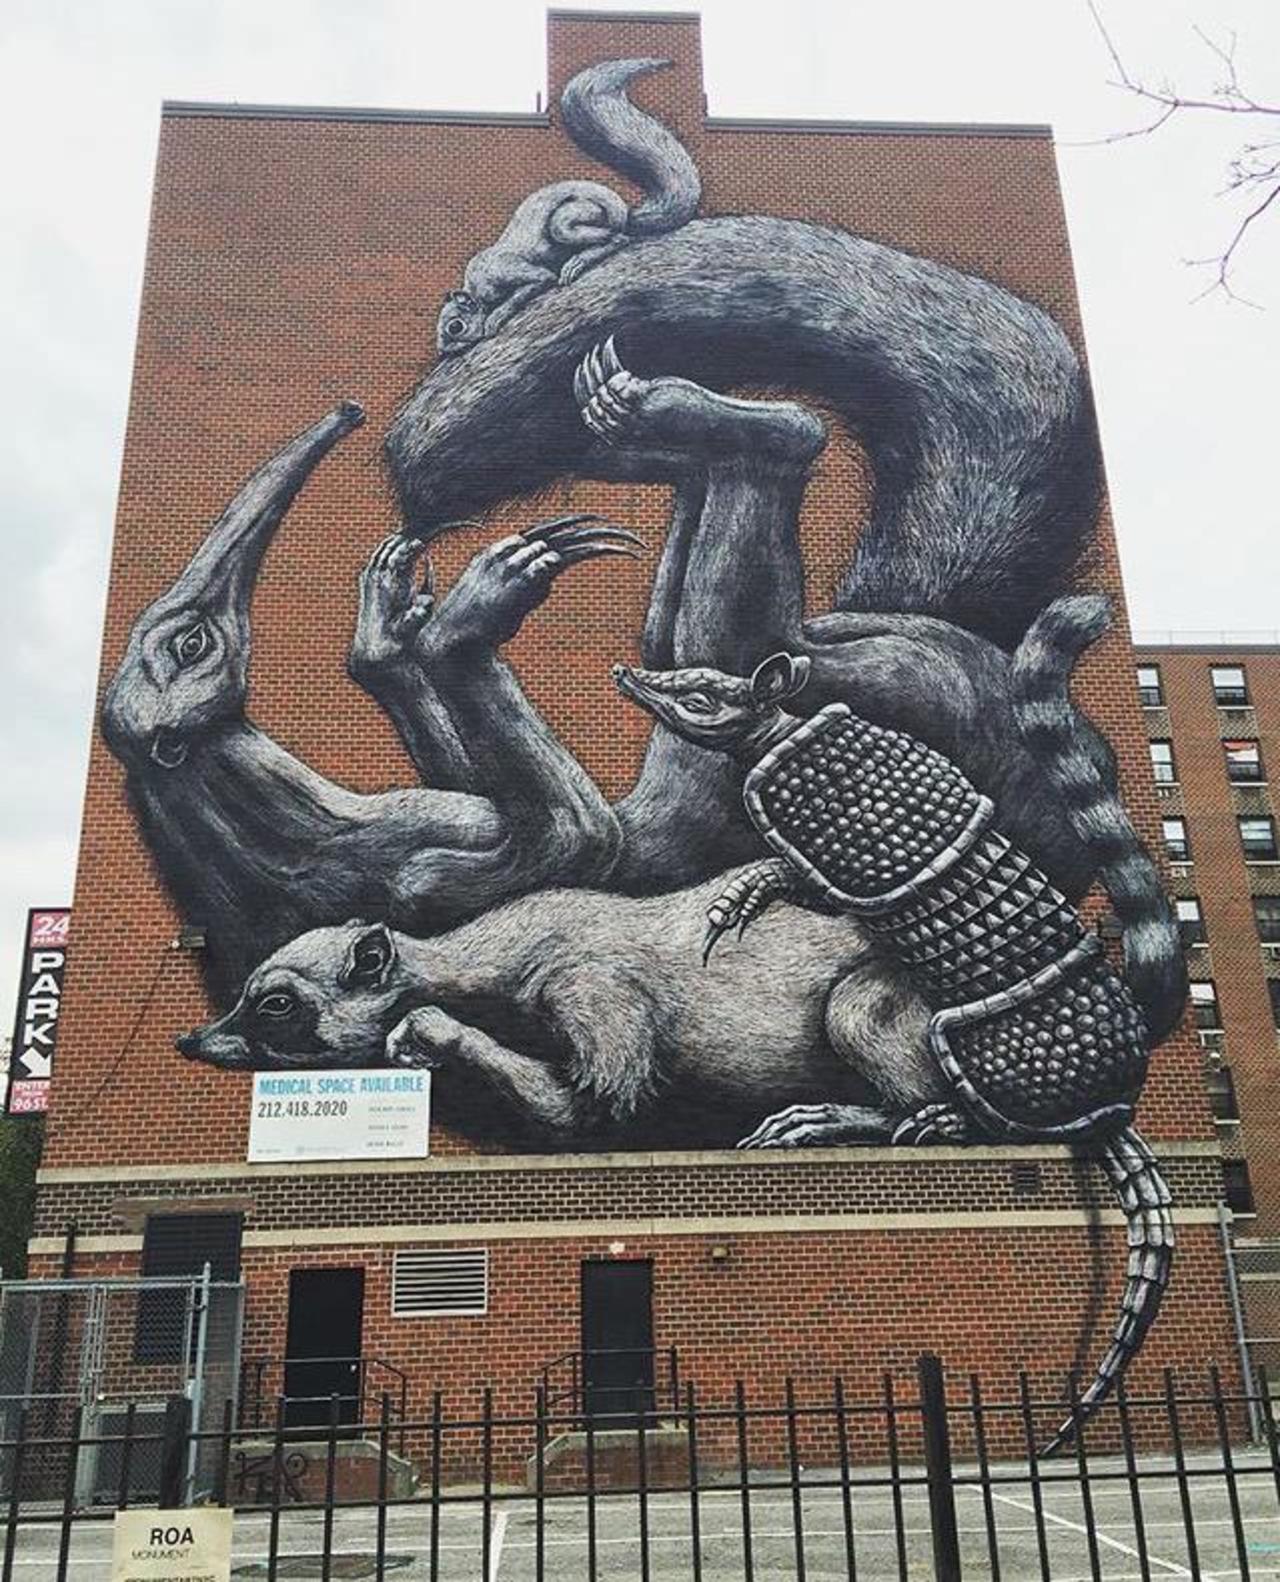 The completed new large scale Street Art wall by ROA in NYC

#art #graffiti #mural #streetart http://t.co/y1vrnCaLT1